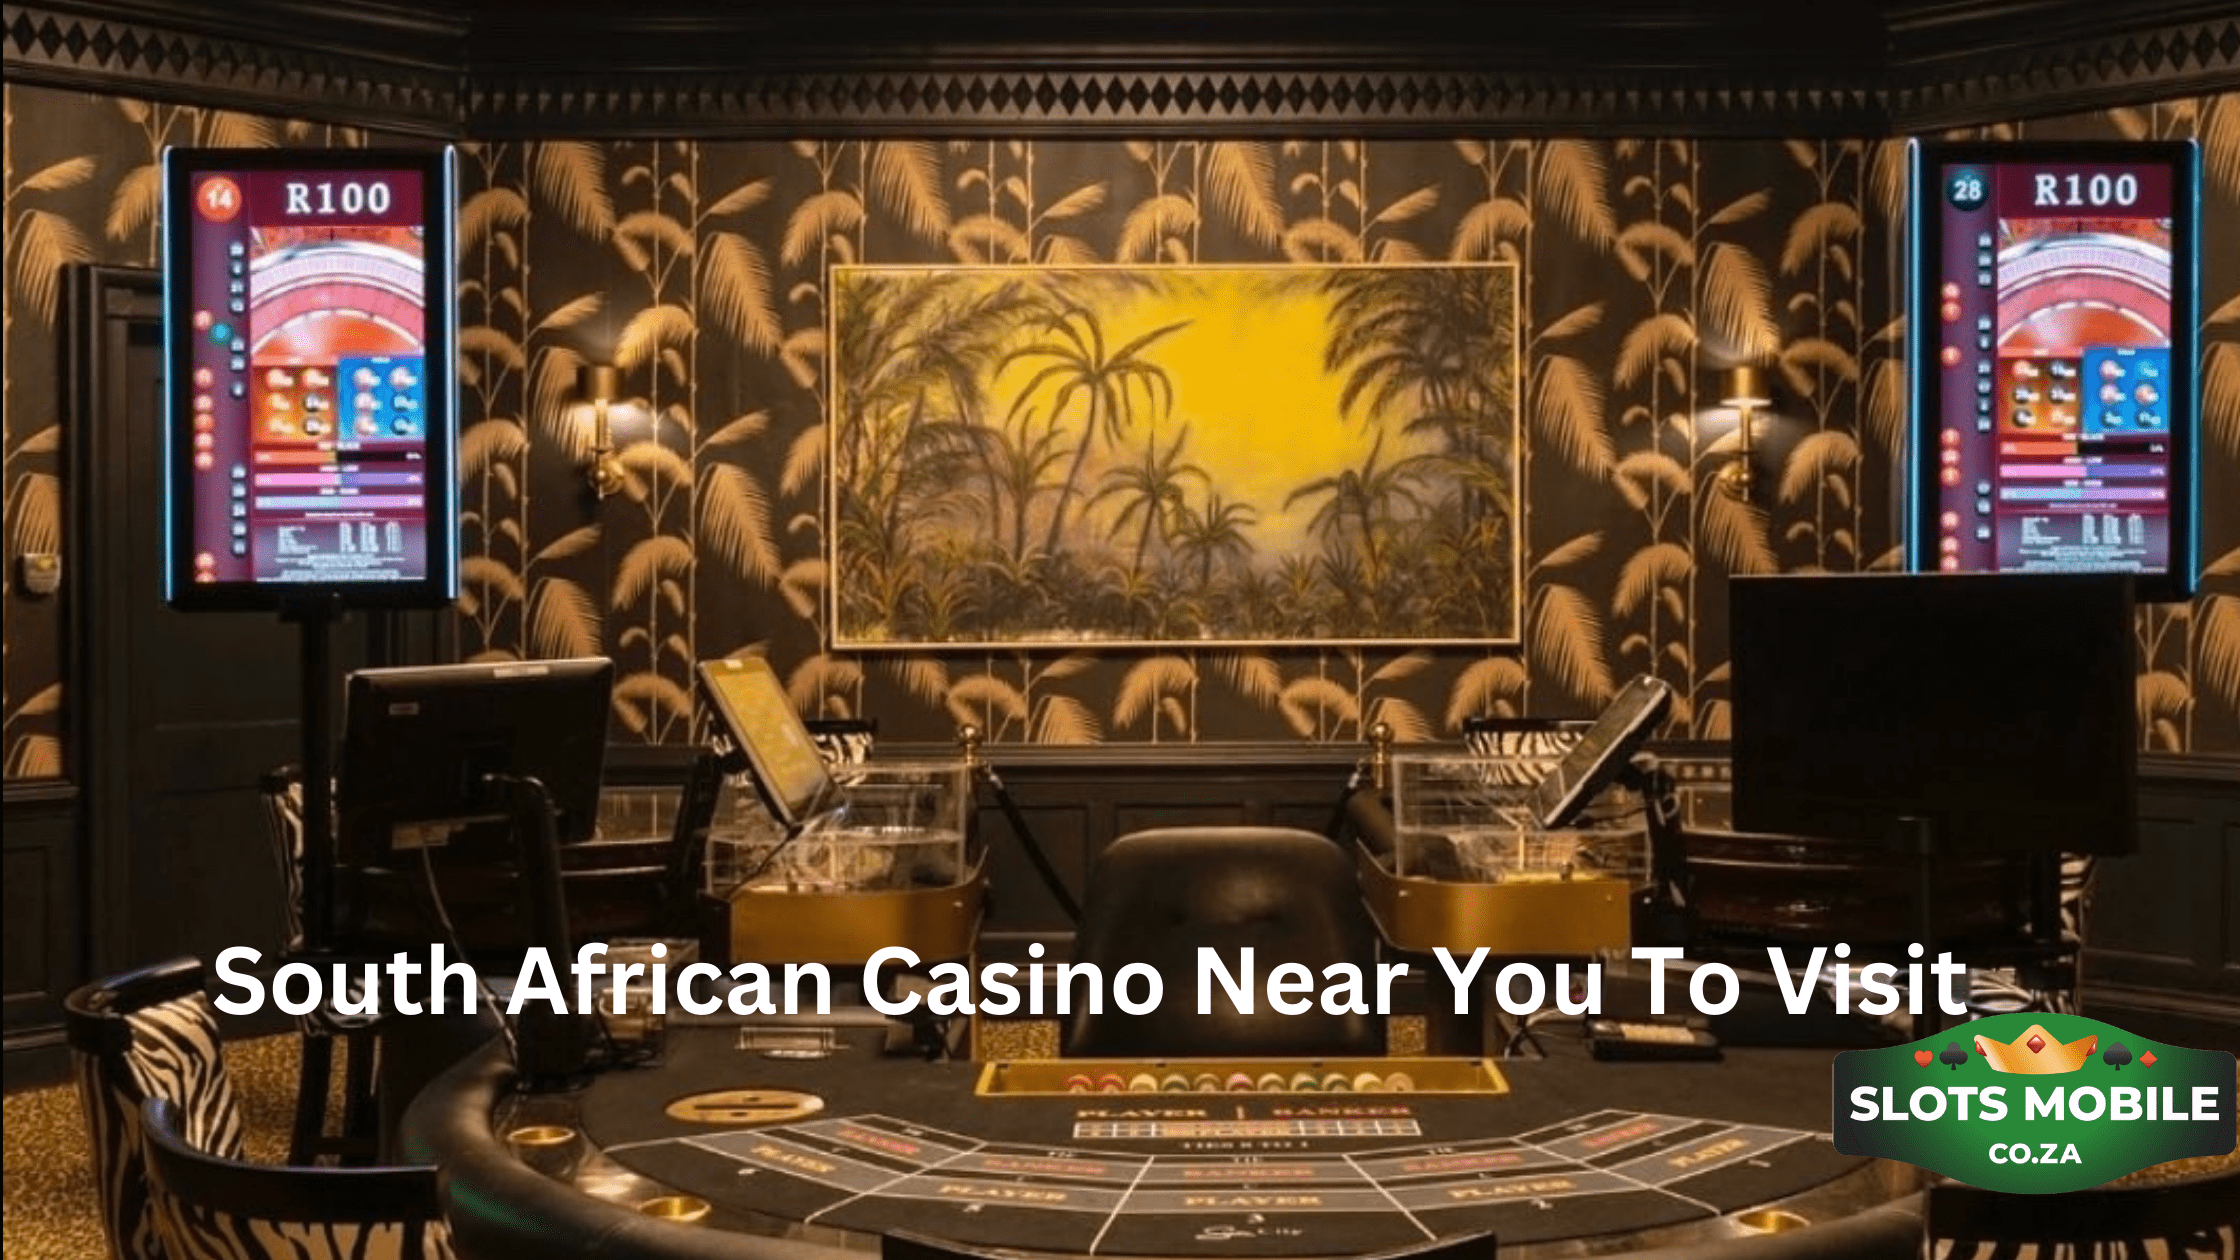 South African Casino Near You To Visit